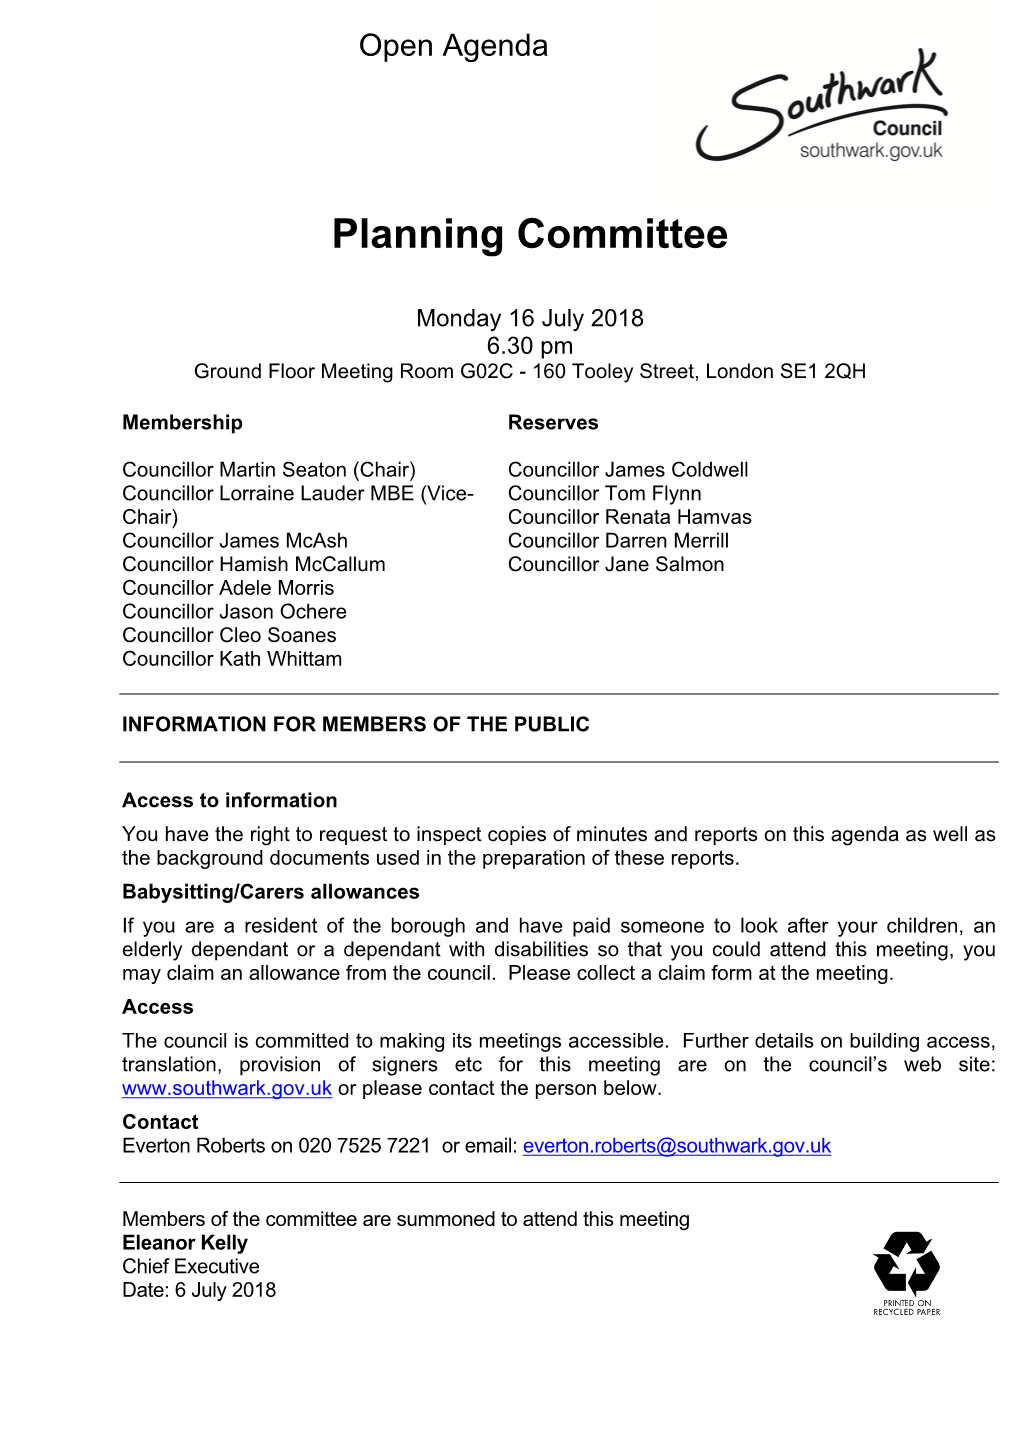 (Public Pack)Agenda Document for Planning Committee, 16/07/2018